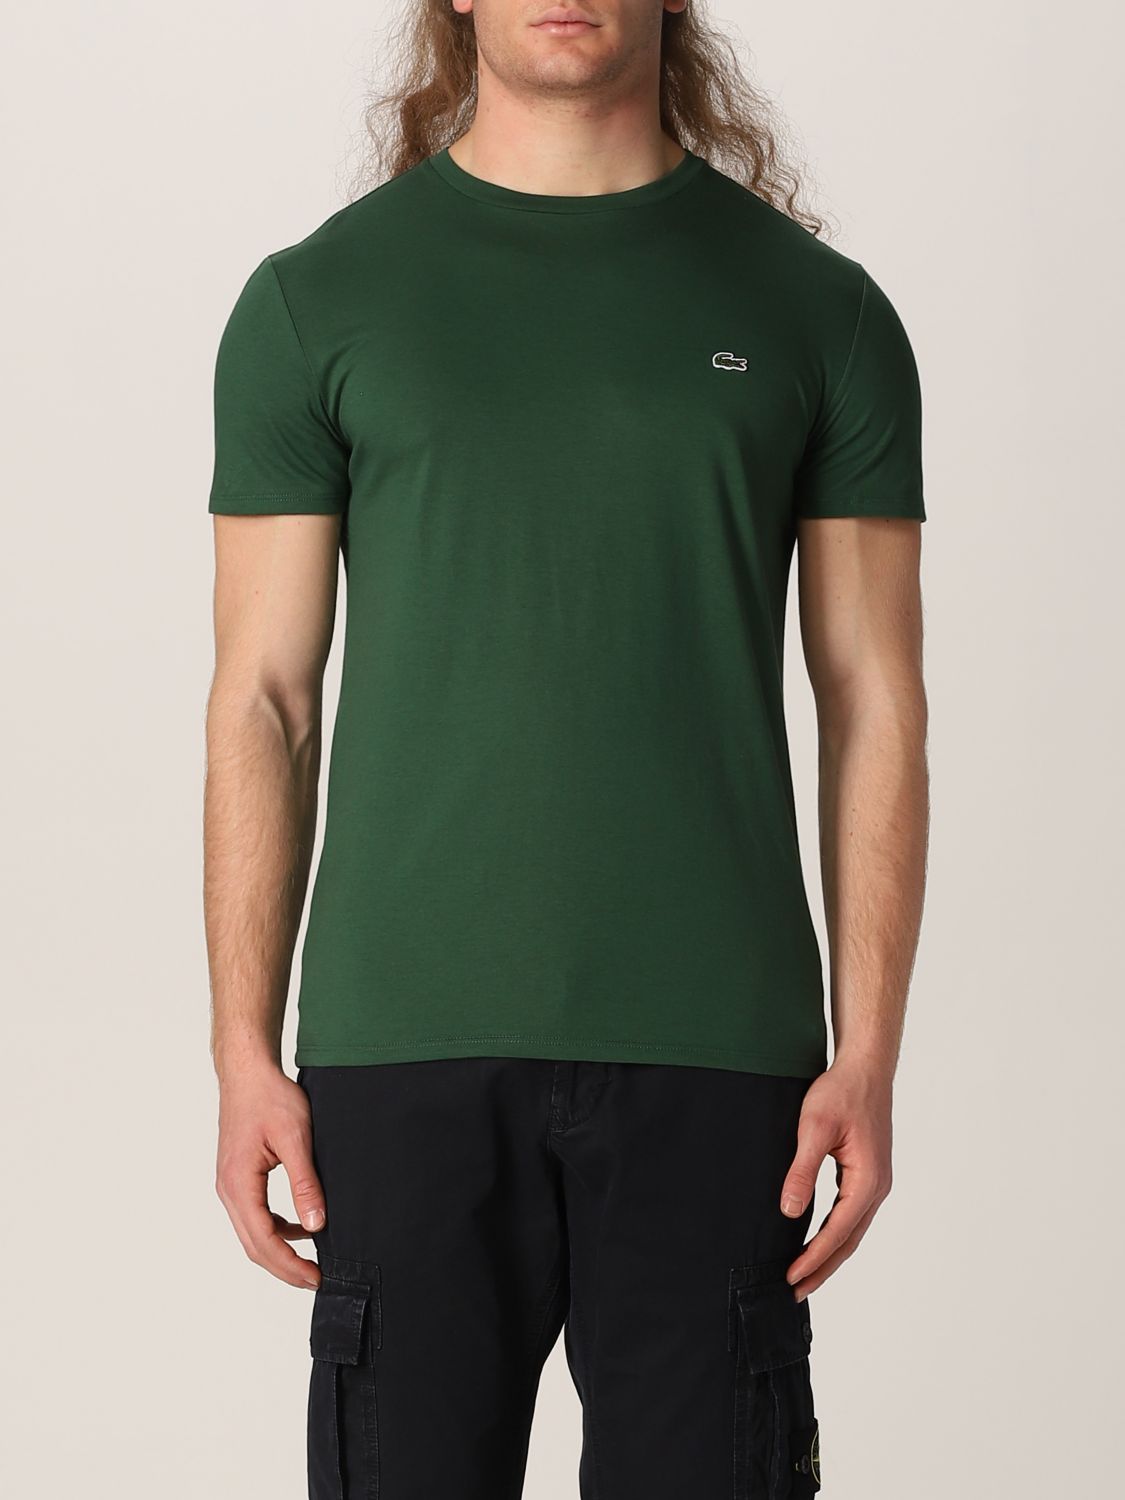 Lacoste t-shirt for man - Green | Lacoste t-shirt TH6709 online at GIGLIO.COM